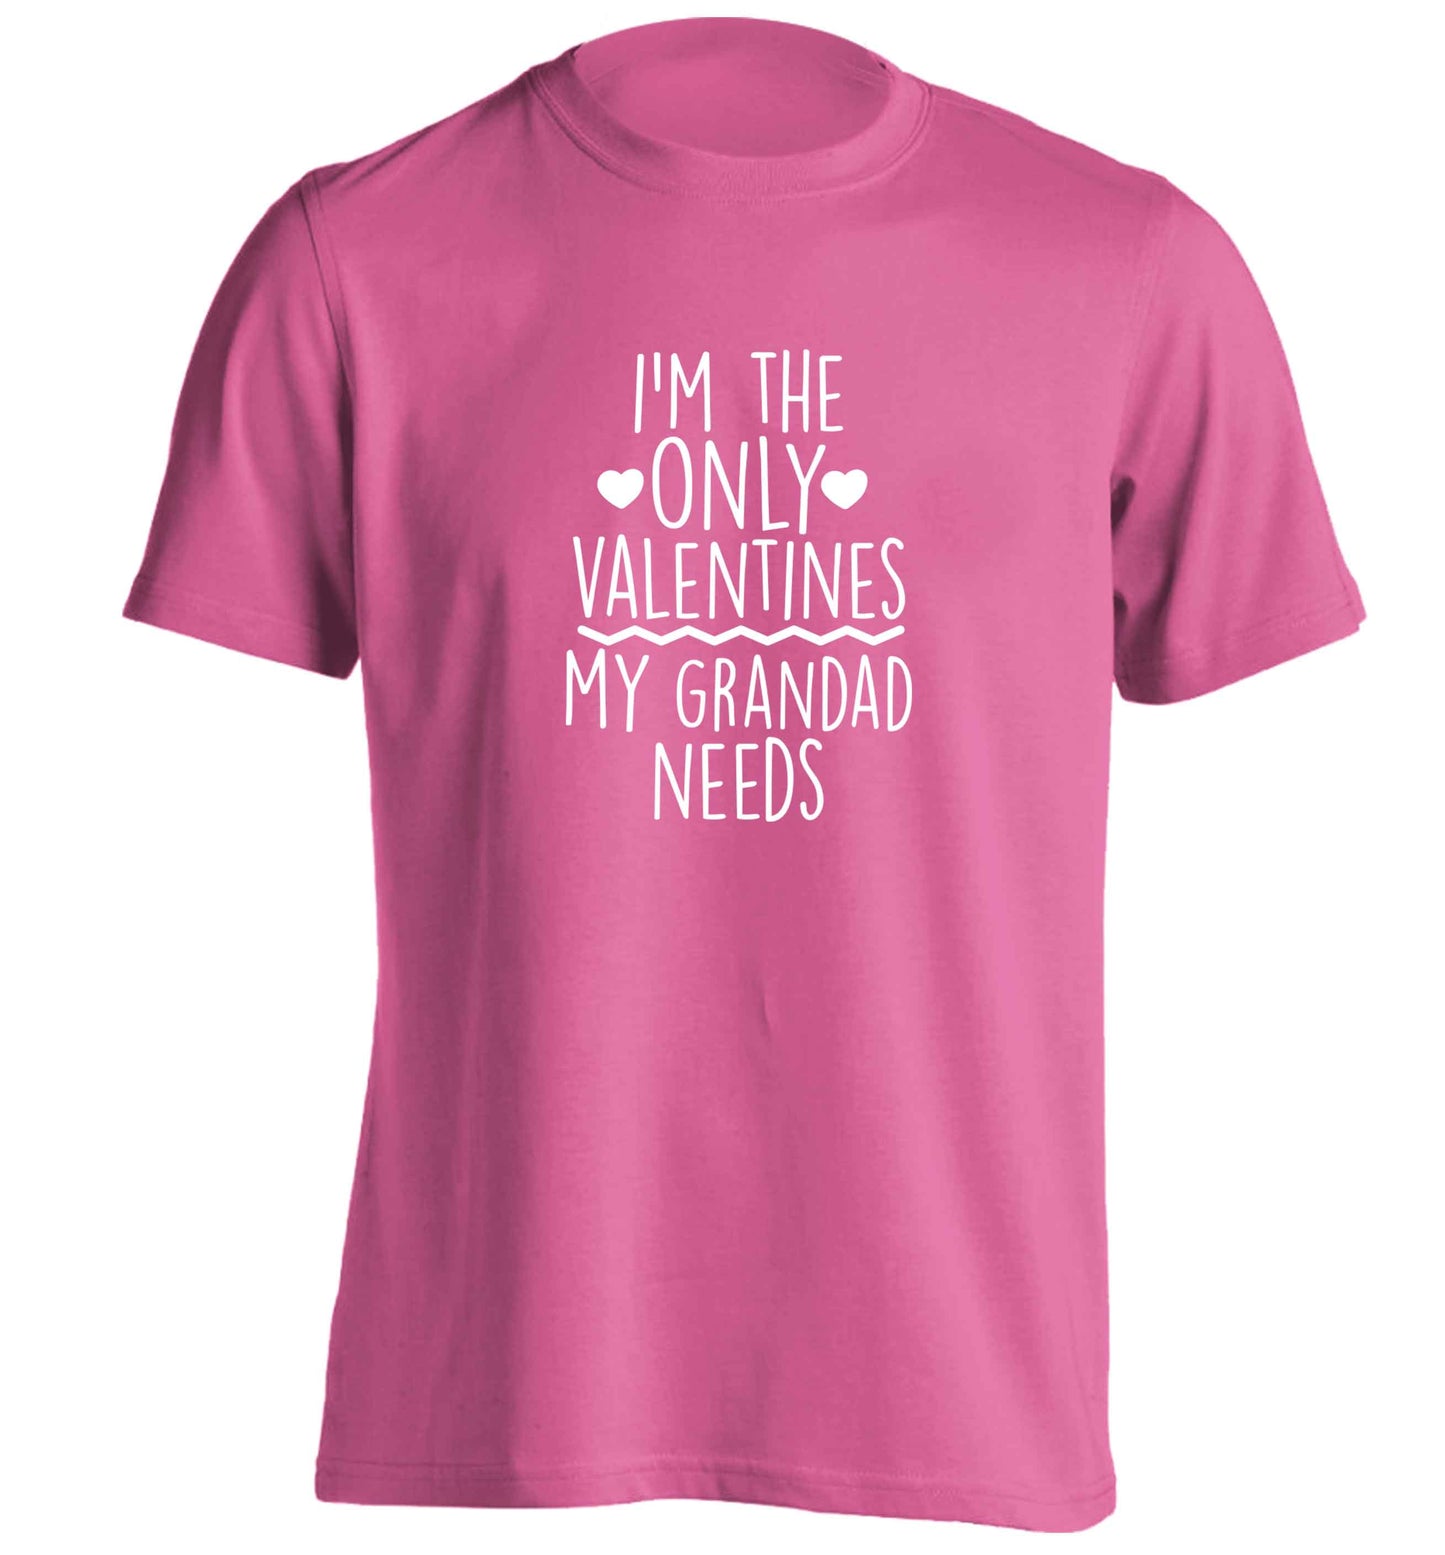 I'm the only valentines my grandad needs adults unisex pink Tshirt 2XL